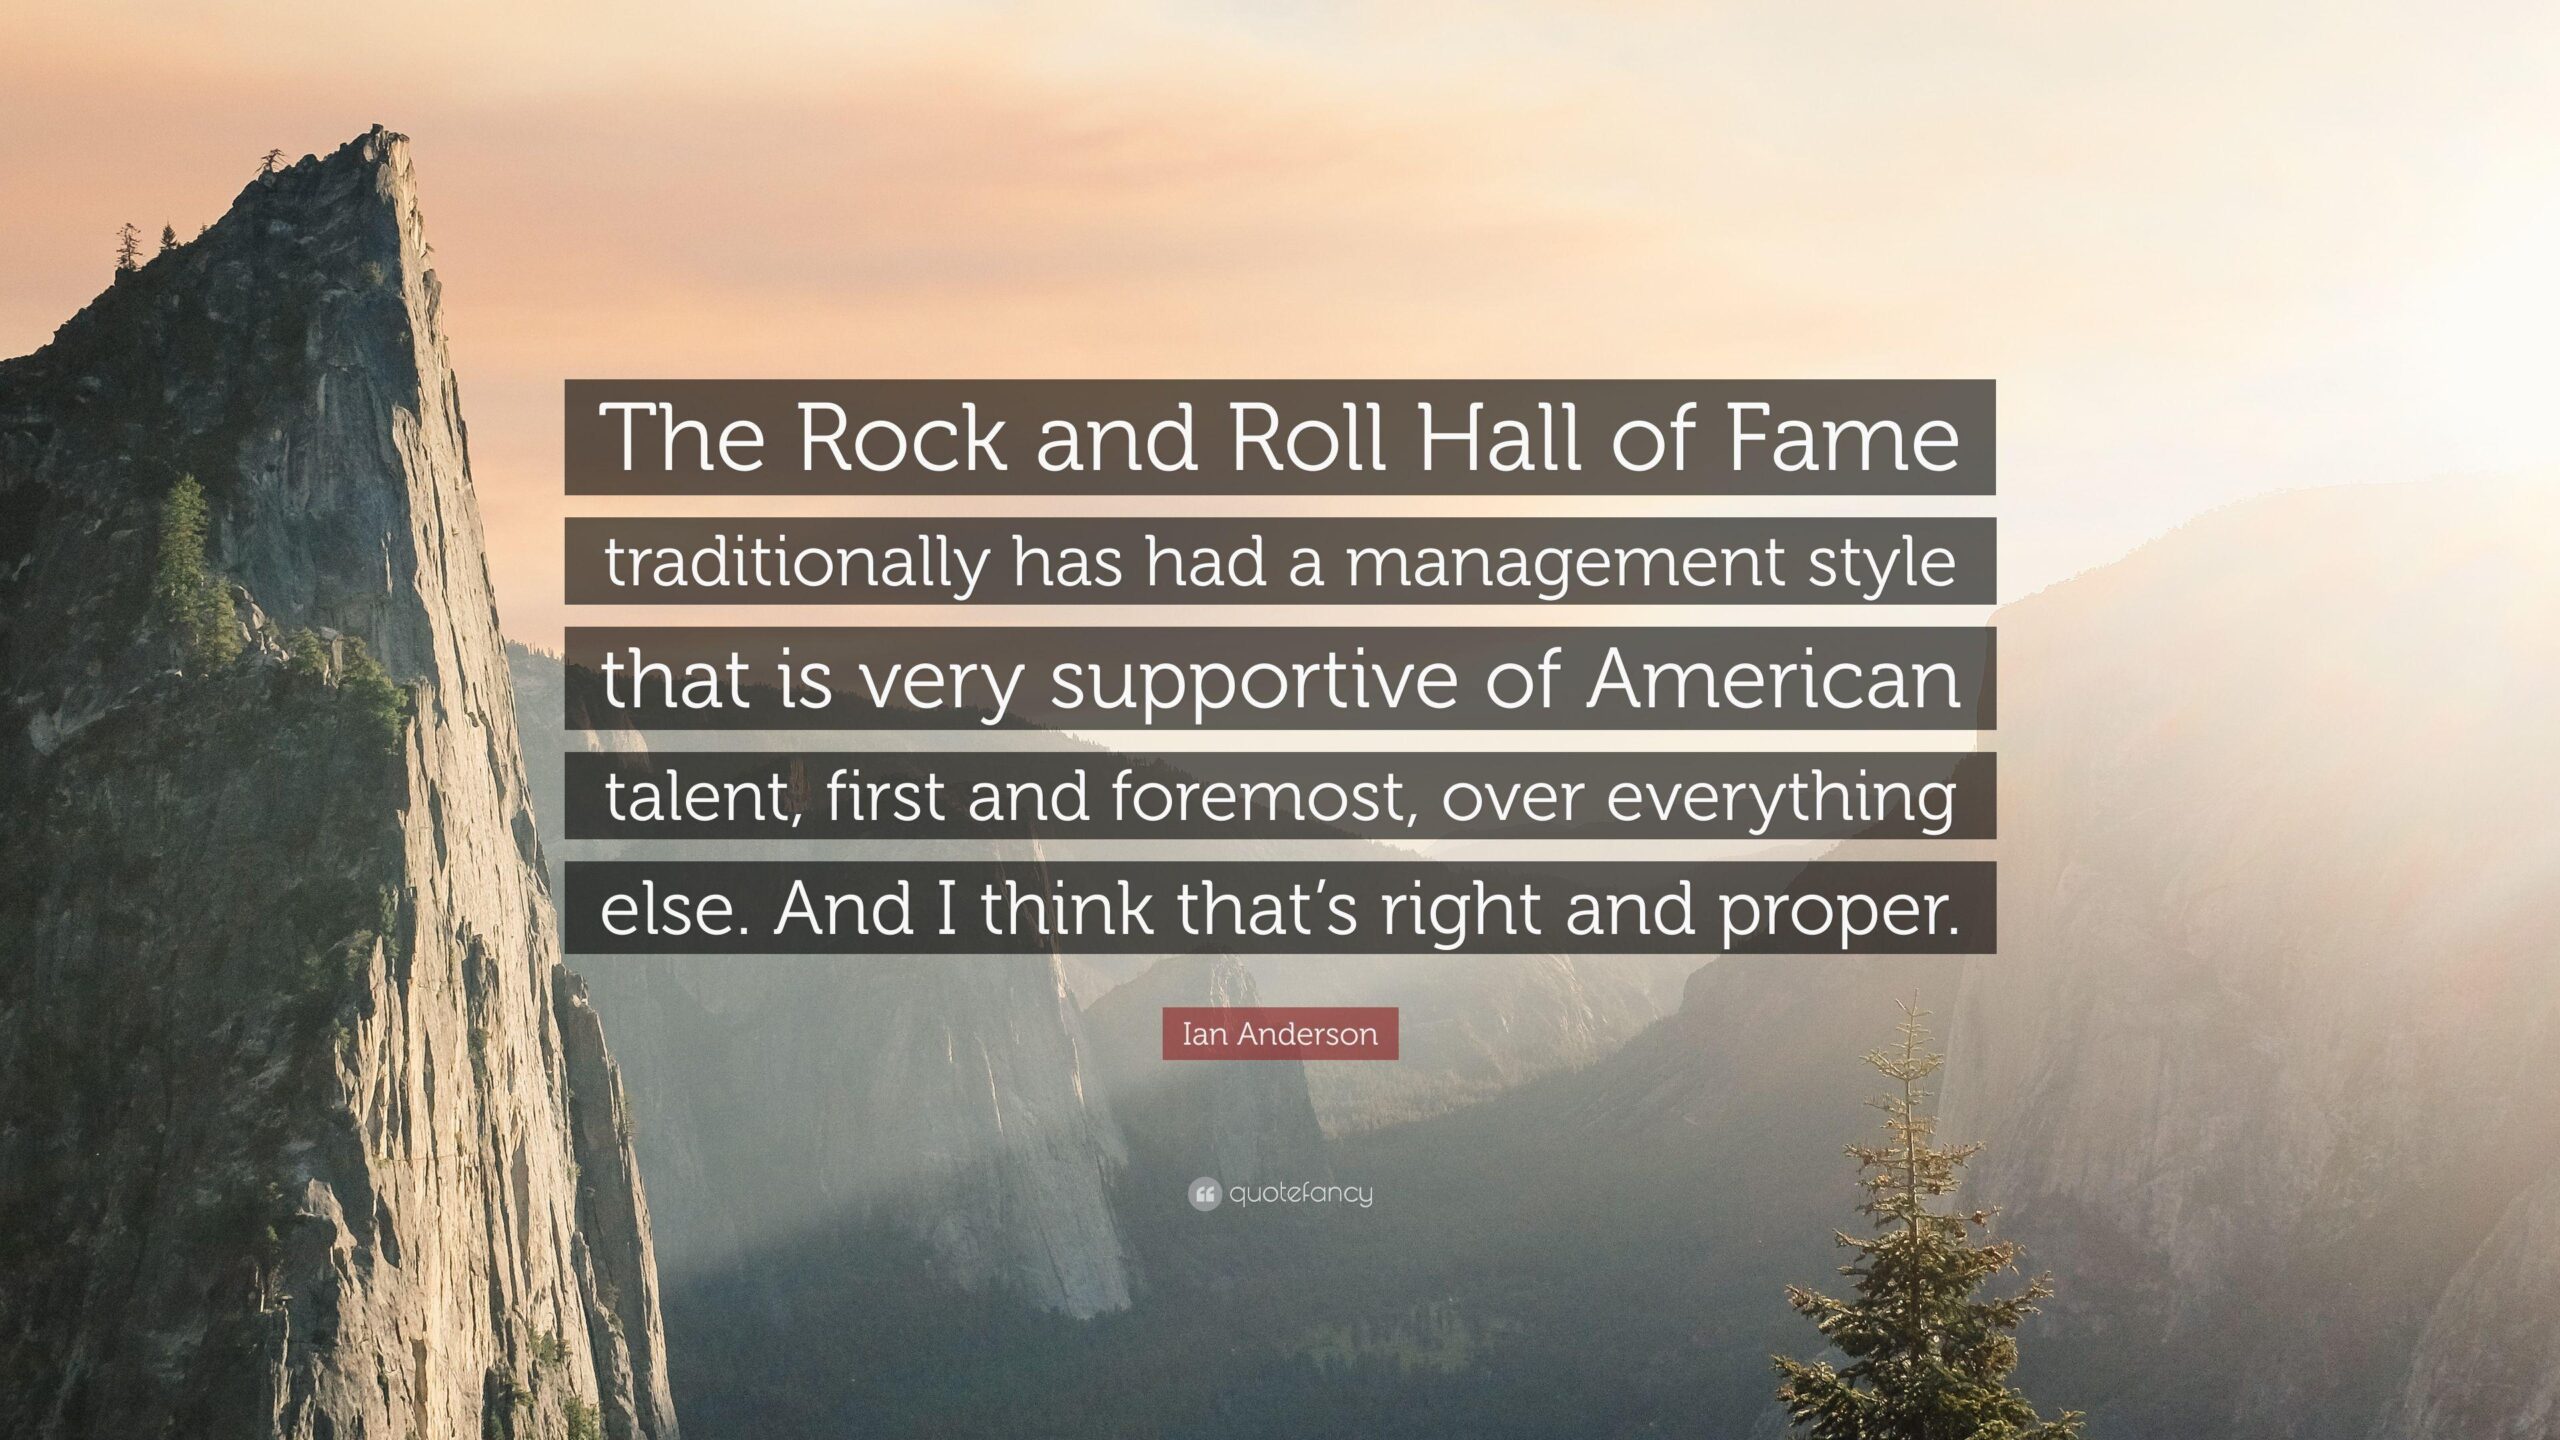 Ian Anderson Quote “The Rock and Roll Hall of Fame traditionally